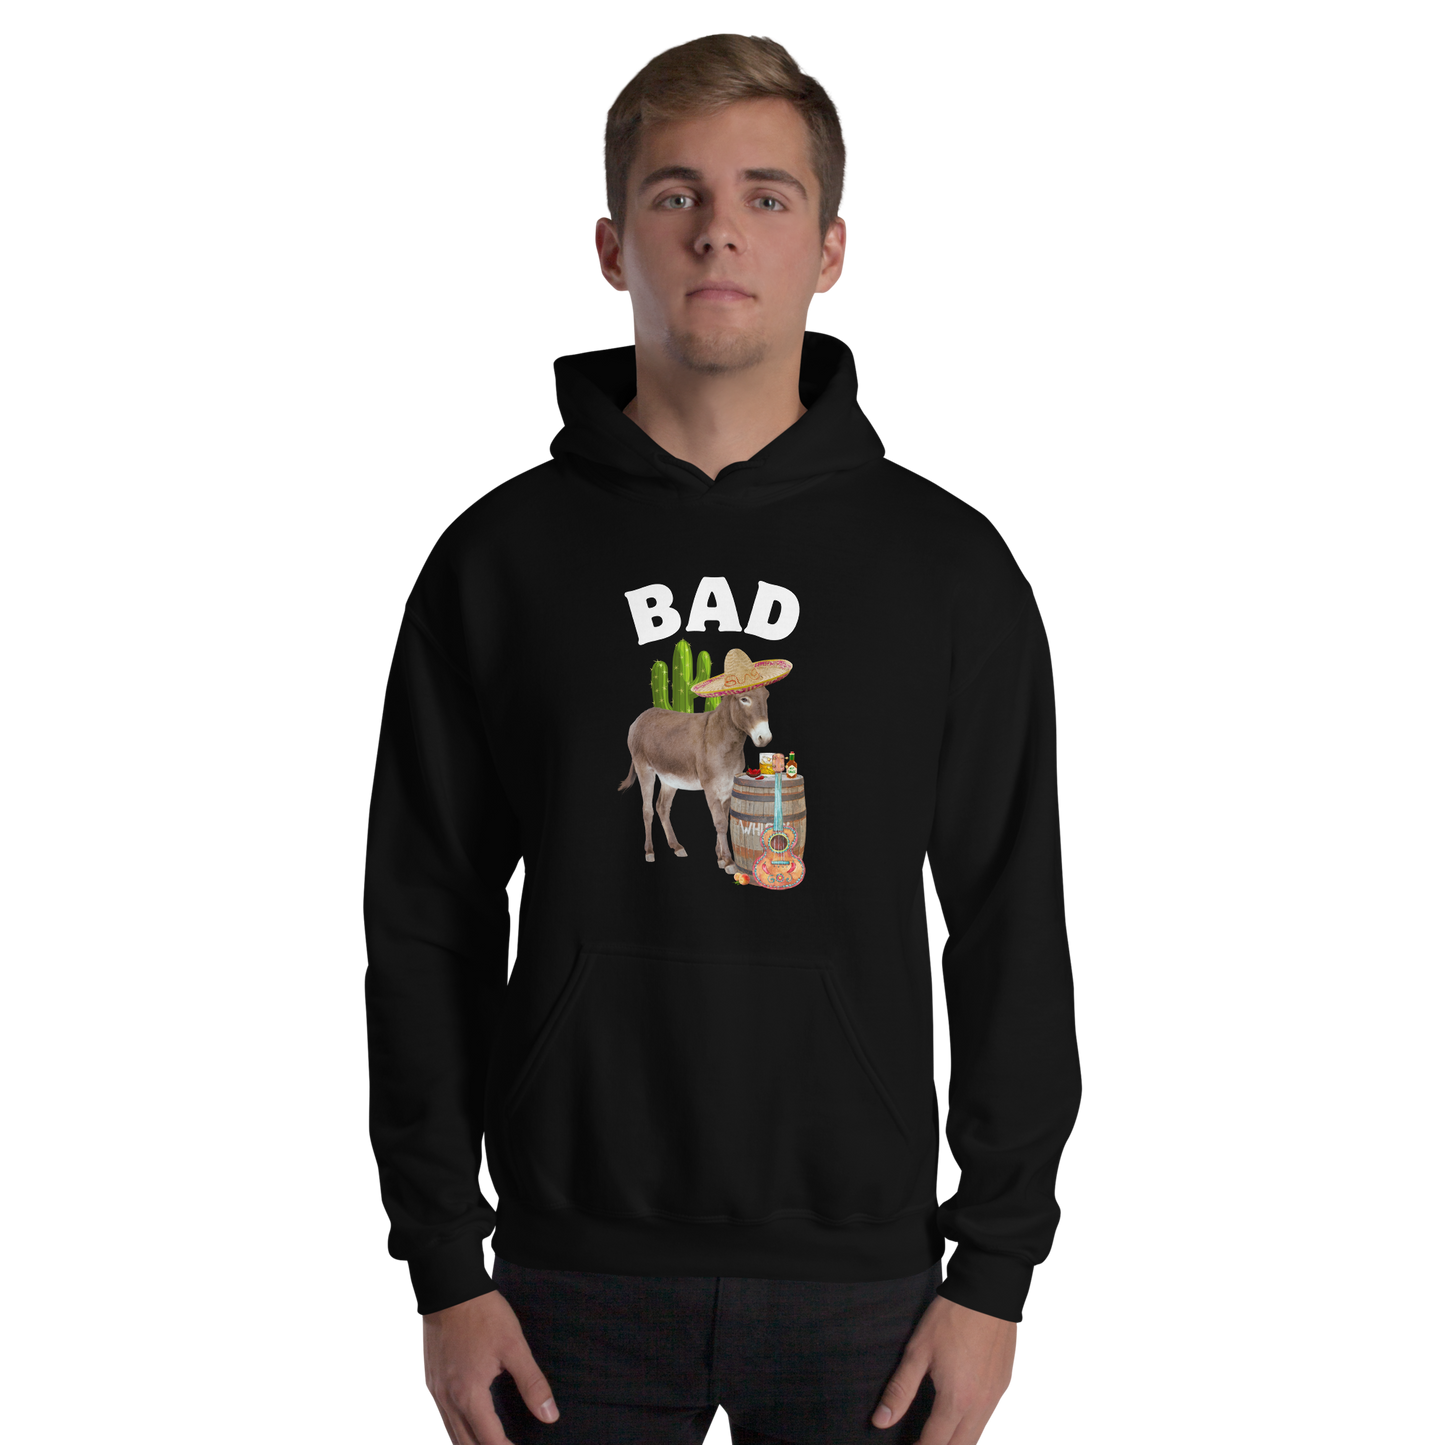 Man wearing a Black Donkey Hoodie Featuring a Funny Bad Ass Donkey graphic on the chest - Funny Graphic Bad Ass Donkey Hoodies - Boozy Fox